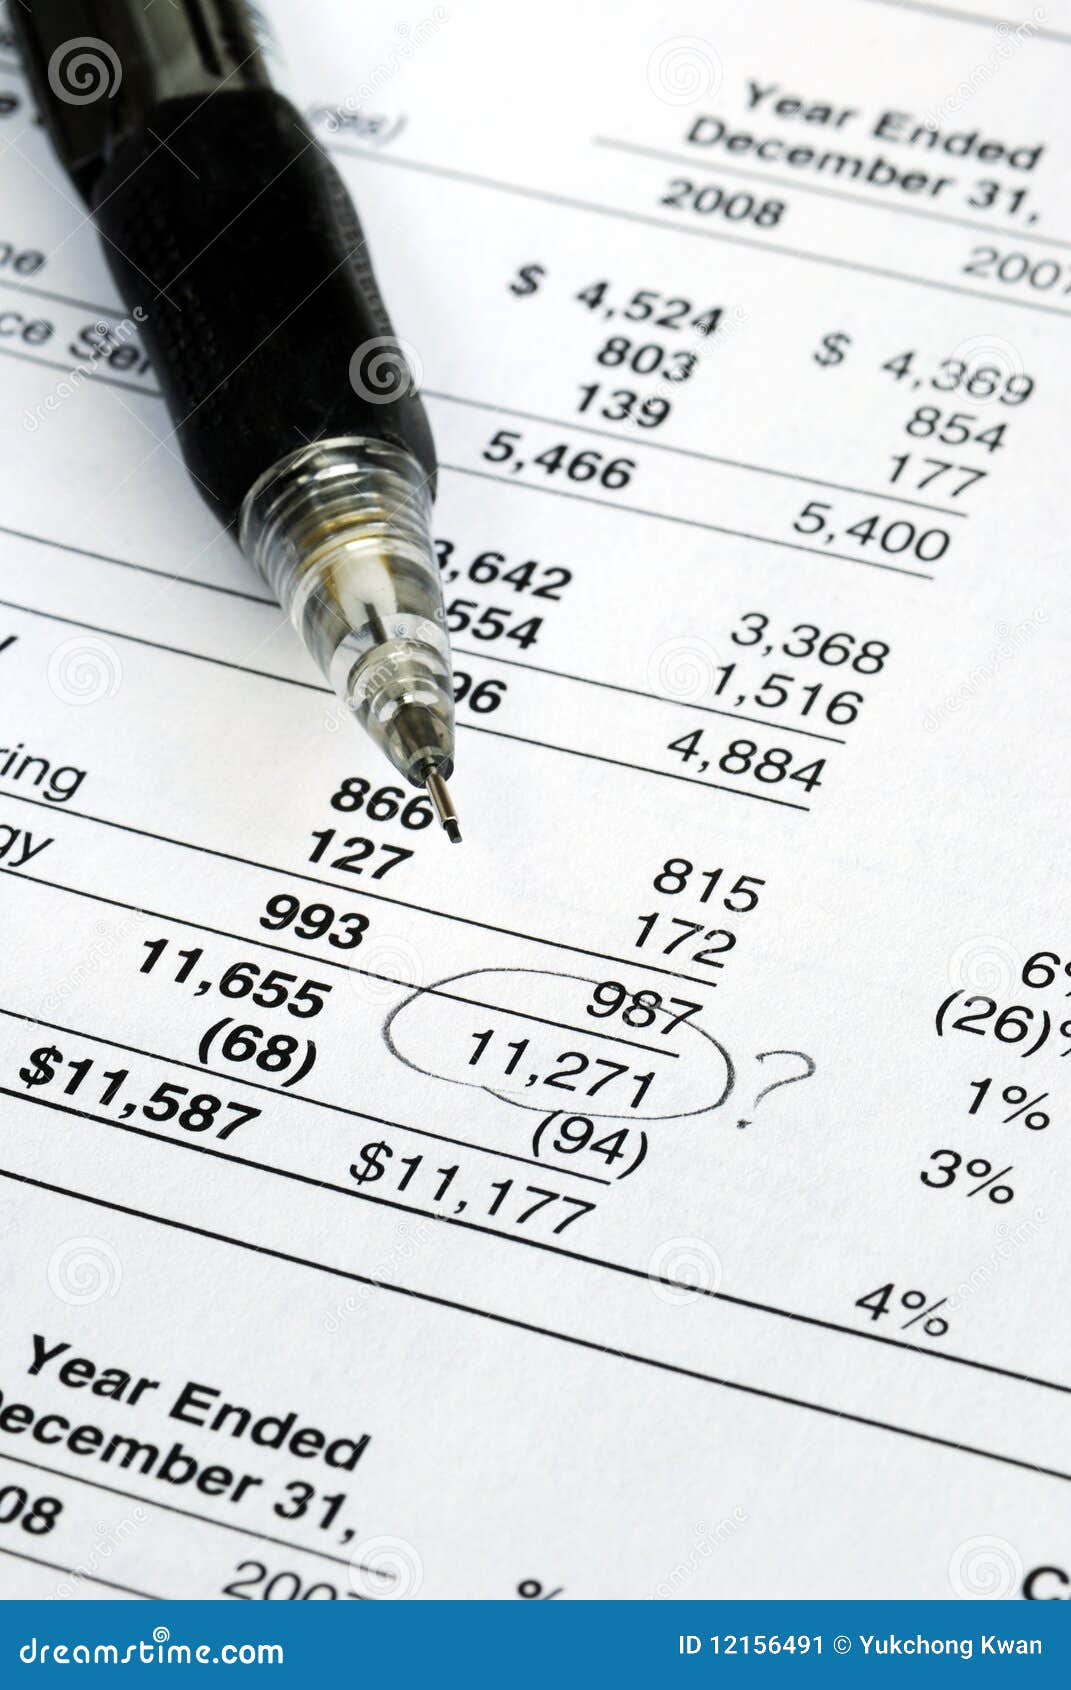 find a mistake in auditing the financial statement